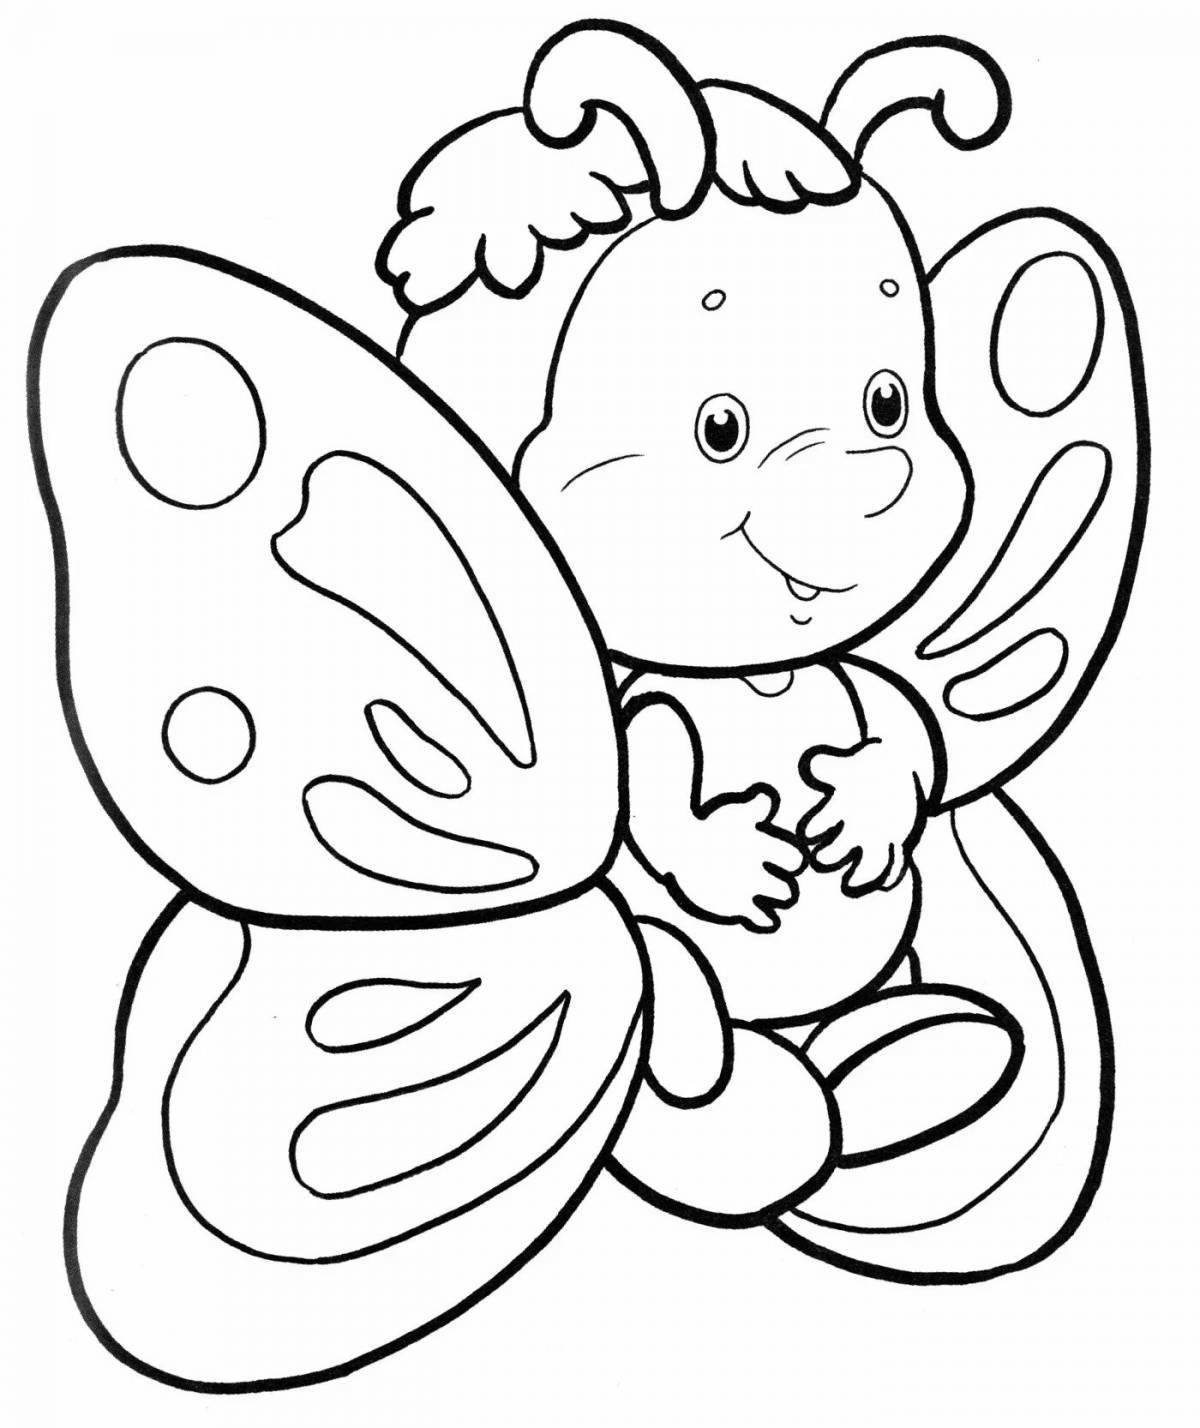 Blissful baby butterfly coloring book